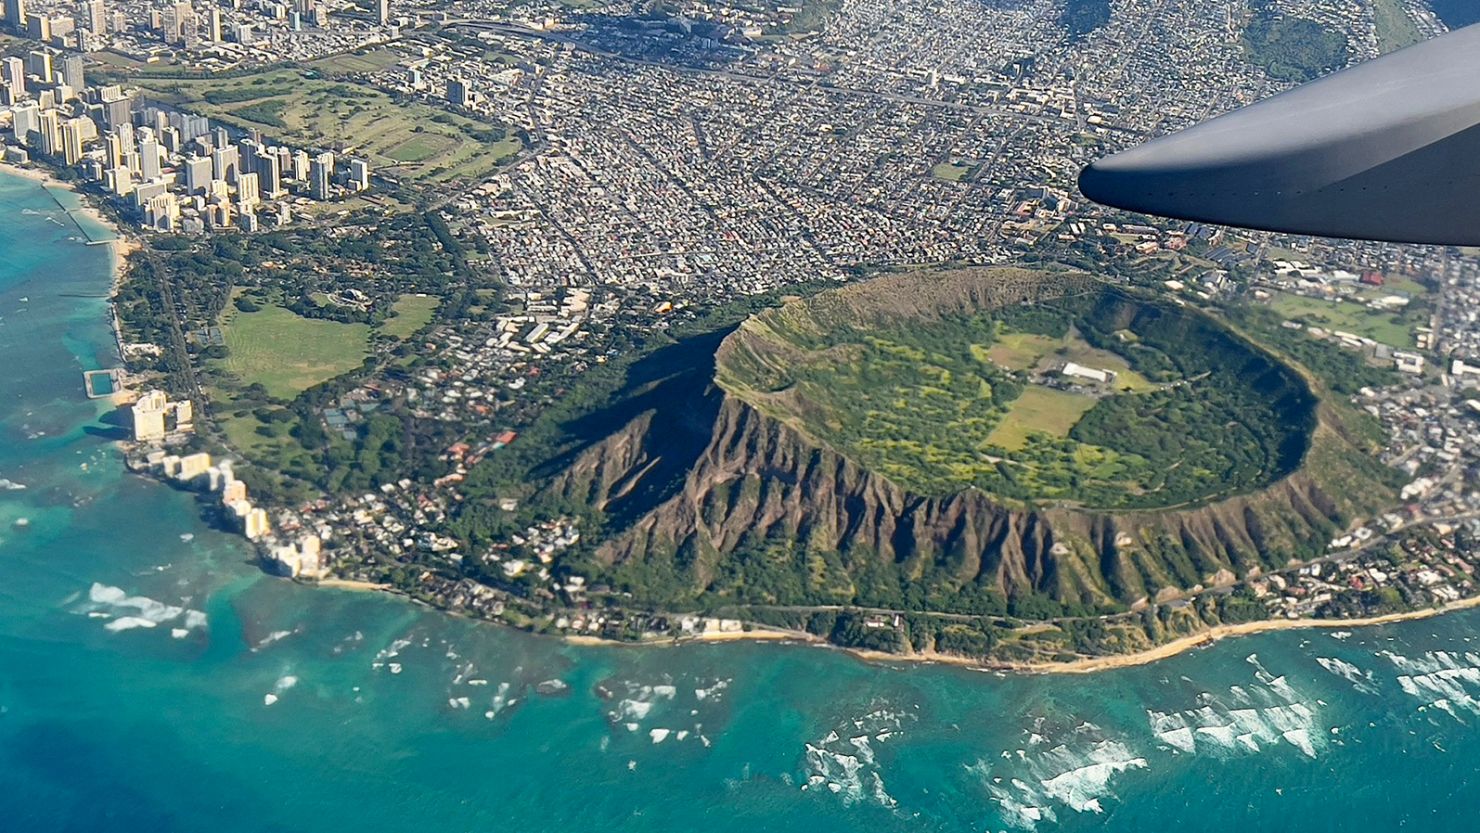 An aerial view from the window of a plane shows Diamond Head crater in Oahu, Hawaii on February 23, 2022. (Photo by Daniel SLIM / AFP) (Photo by DANIEL SLIM/AFP via Getty Images)